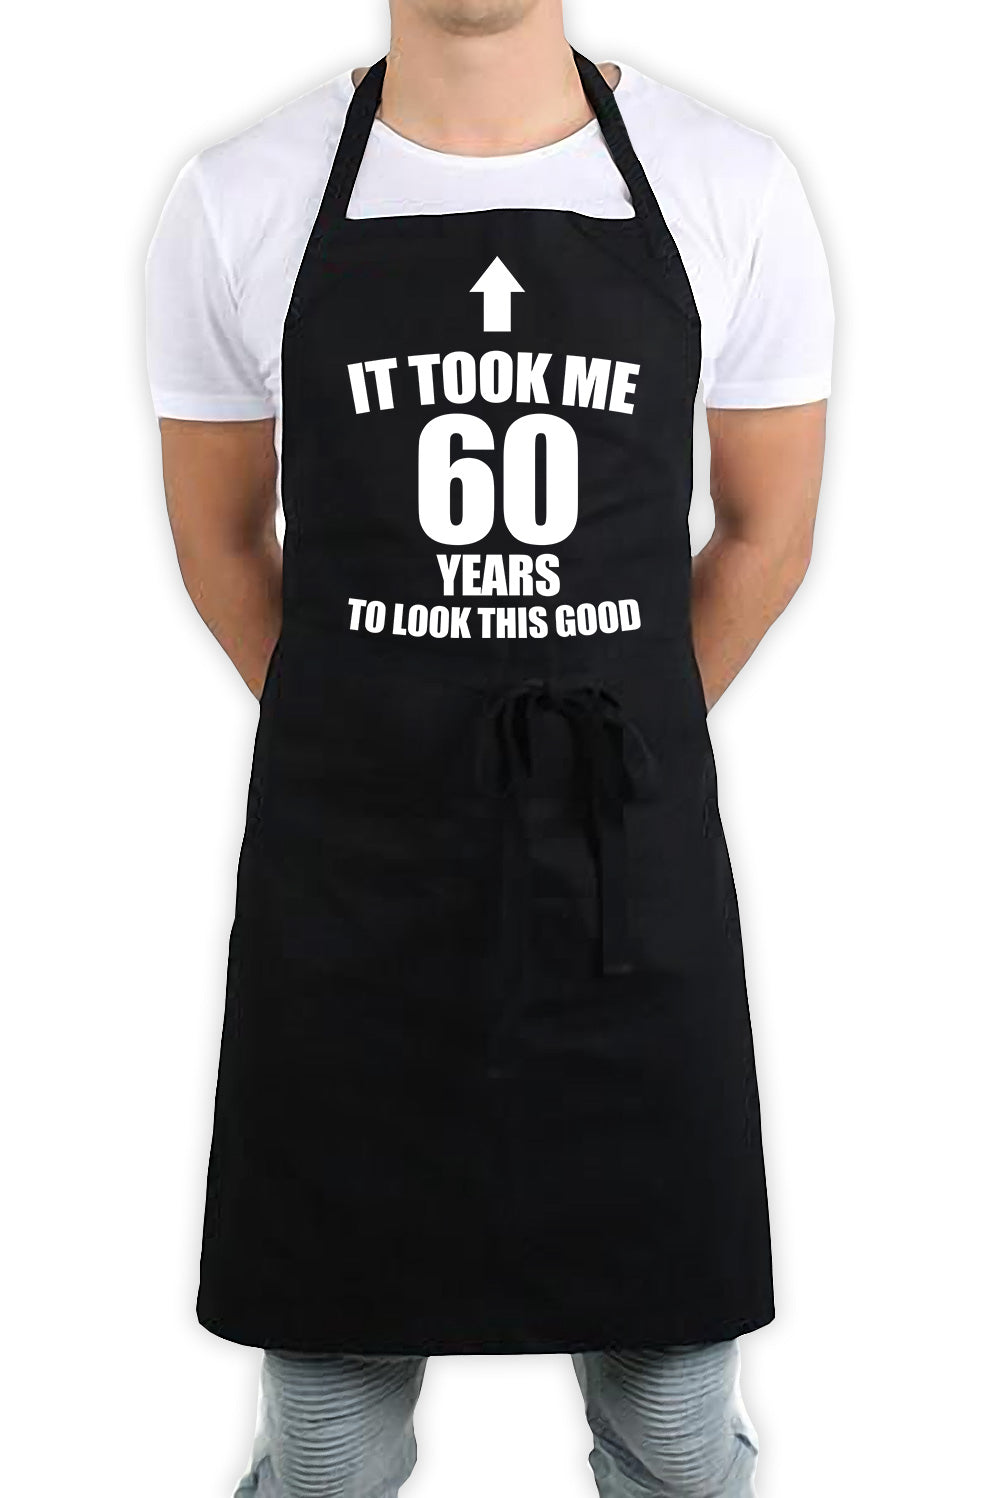 It Took Me 60 Years To Look This Good Funny Kitchen BBQ Apron Black